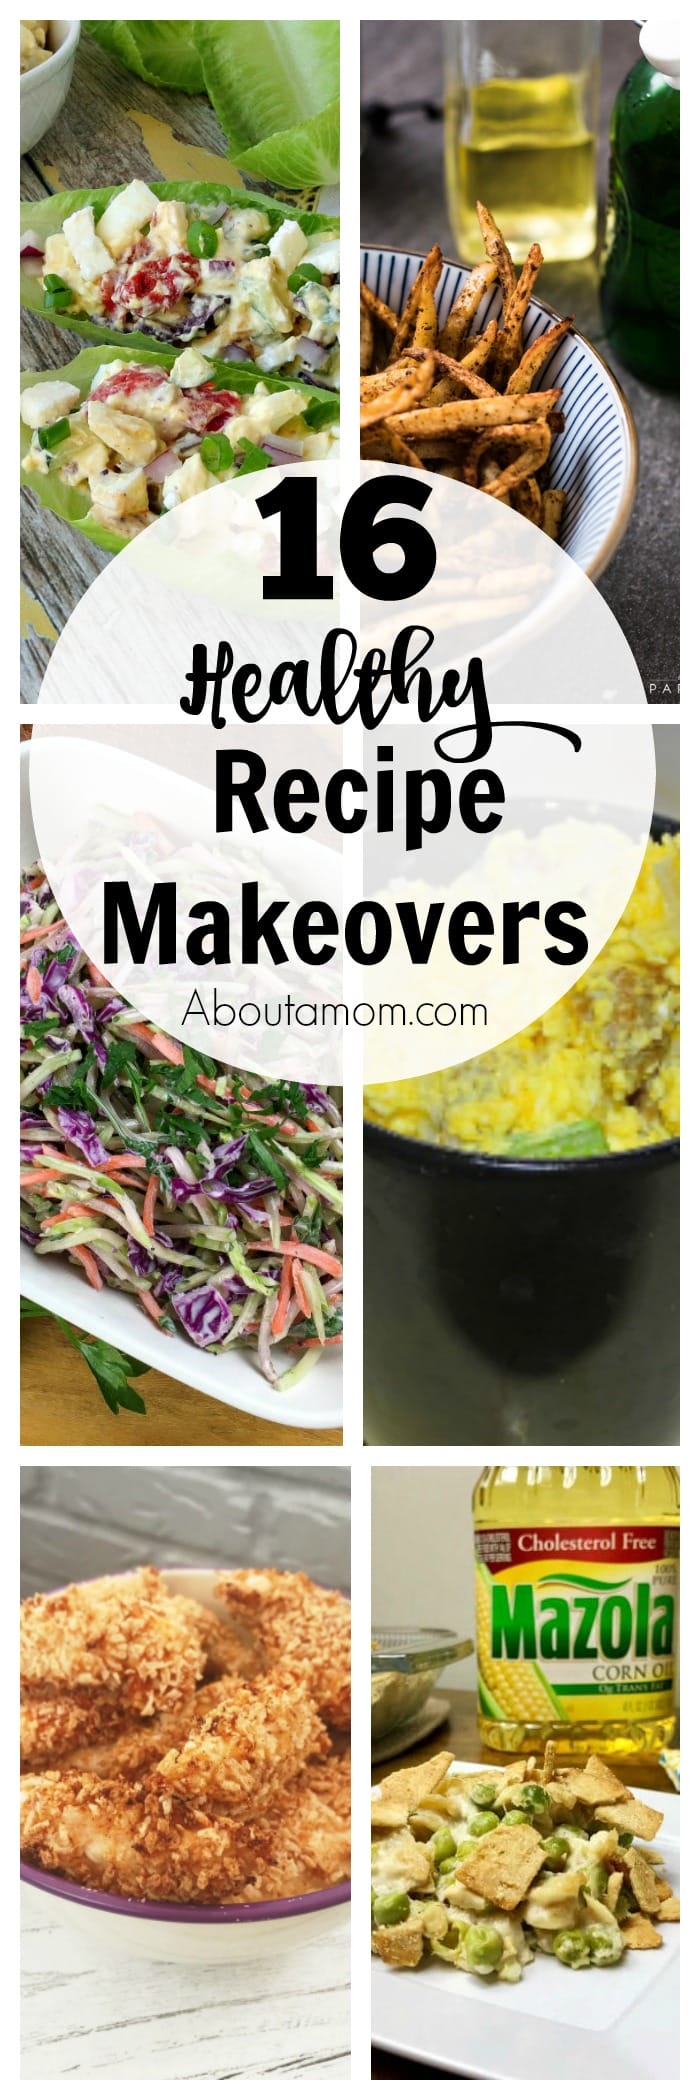 16 Healthy Recipe Makeovers